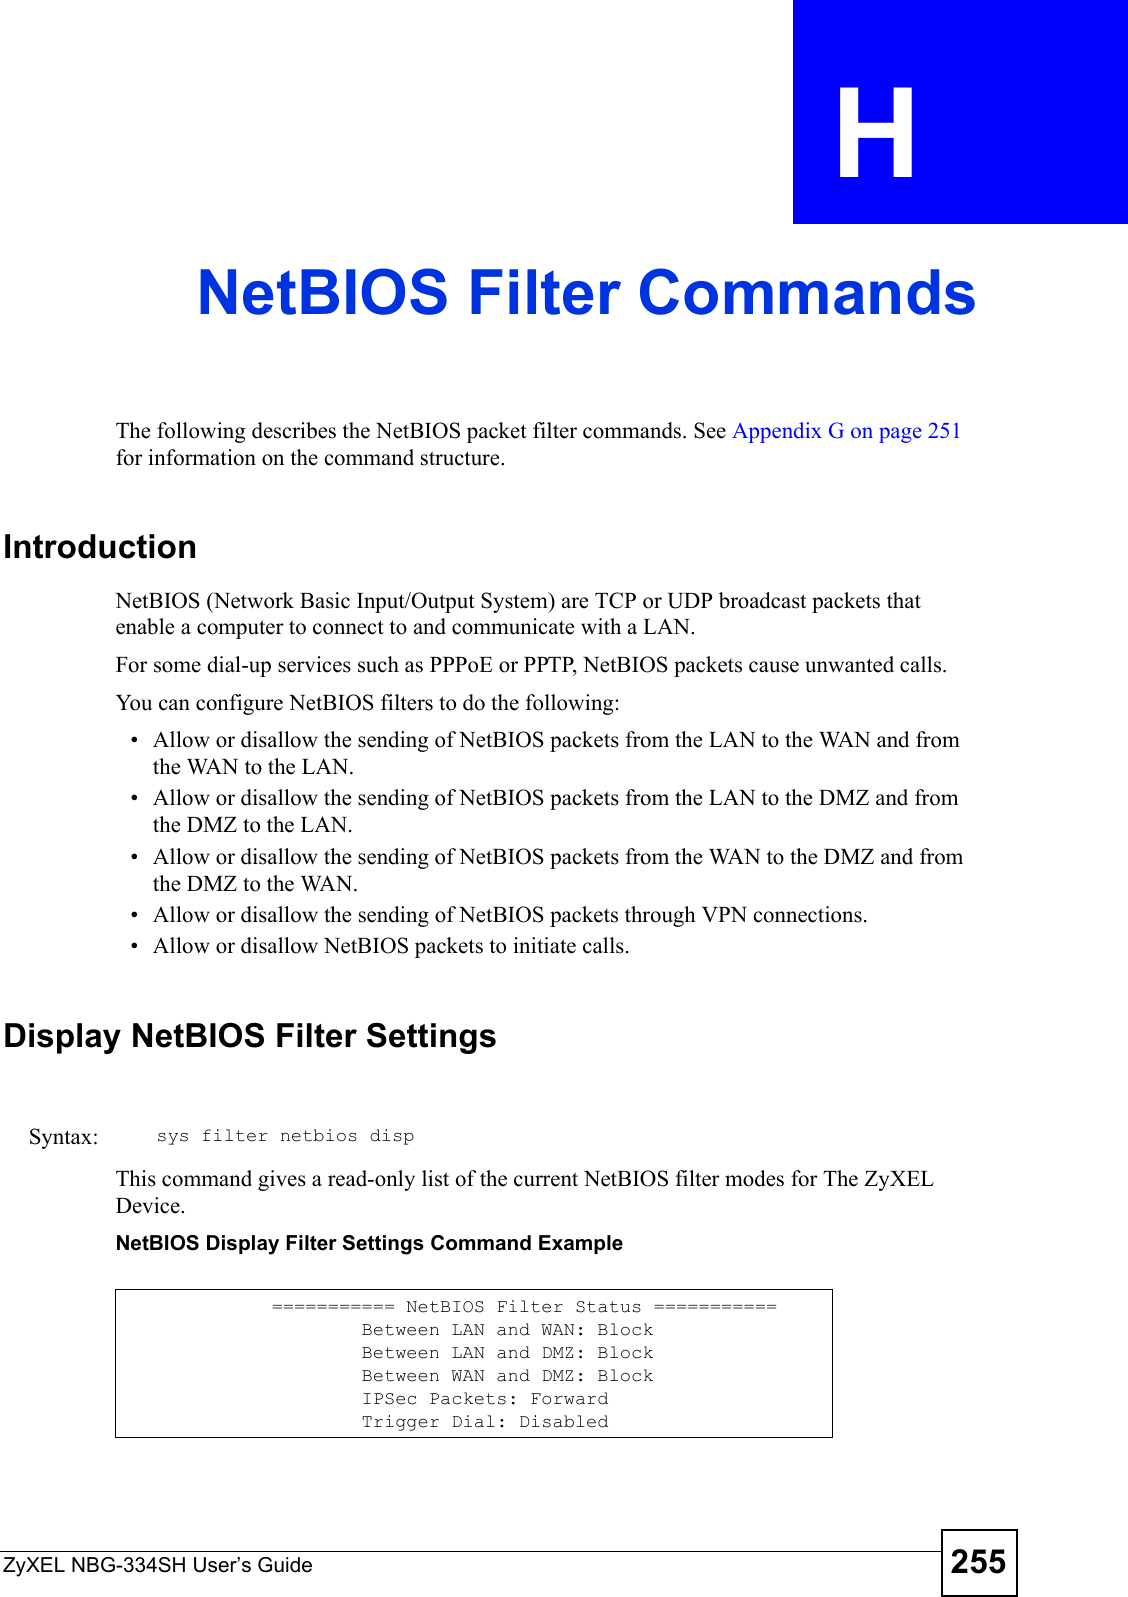 ZyXEL NBG-334SH User’s Guide 255APPENDIX  H NetBIOS Filter CommandsThe following describes the NetBIOS packet filter commands. See Appendix G on page 251 for information on the command structure. IntroductionNetBIOS (Network Basic Input/Output System) are TCP or UDP broadcast packets that enable a computer to connect to and communicate with a LAN. For some dial-up services such as PPPoE or PPTP, NetBIOS packets cause unwanted calls.You can configure NetBIOS filters to do the following:• Allow or disallow the sending of NetBIOS packets from the LAN to the WAN and from the WAN to the LAN.• Allow or disallow the sending of NetBIOS packets from the LAN to the DMZ and from the DMZ to the LAN.• Allow or disallow the sending of NetBIOS packets from the WAN to the DMZ and from the DMZ to the WAN.• Allow or disallow the sending of NetBIOS packets through VPN connections.• Allow or disallow NetBIOS packets to initiate calls.Display NetBIOS Filter SettingsThis command gives a read-only list of the current NetBIOS filter modes for The ZyXEL Device.NetBIOS Display Filter Settings Command ExampleSyntax: sys filter netbios disp=========== NetBIOS Filter Status ===========        Between LAN and WAN: Block        Between LAN and DMZ: Block        Between WAN and DMZ: Block        IPSec Packets: Forward        Trigger Dial: Disabled